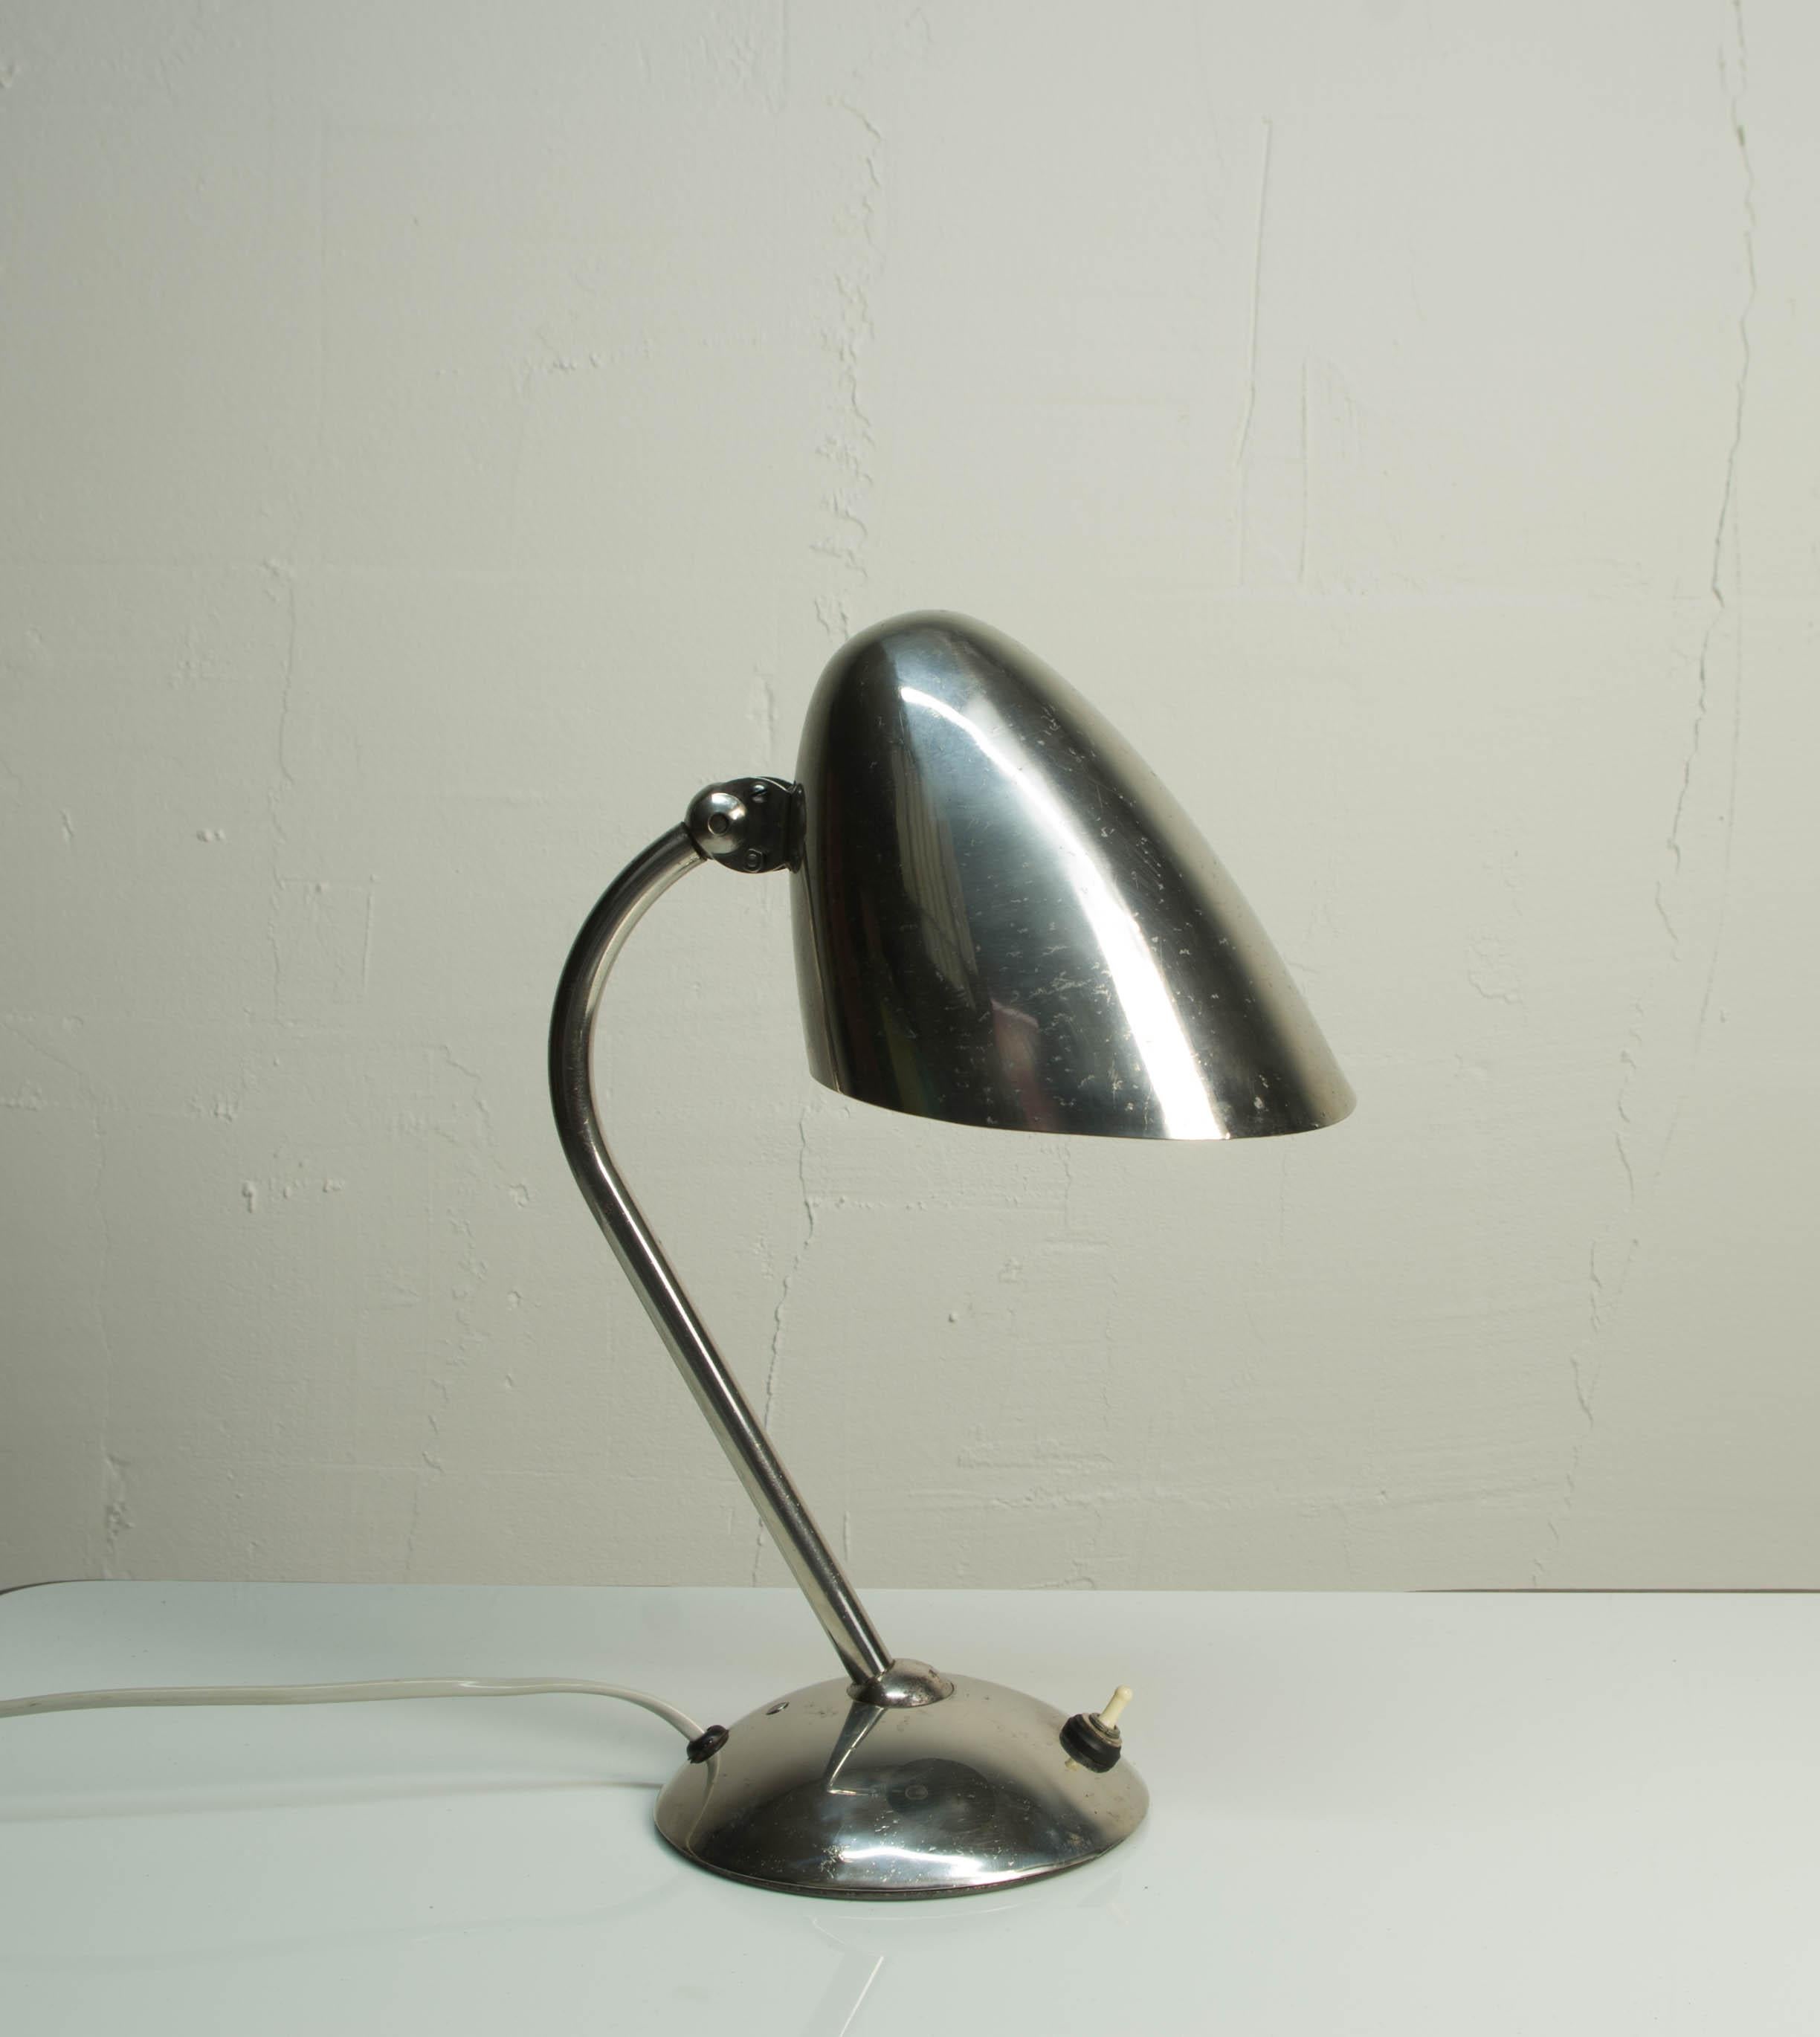 Rare Bauhaus or functionalist table lamp designed by Franta Anyz in 1920. This chrome-plated piece was probably made in the 1930s shortly before his death. Unique patented joints between the base, arm and shade make the shade movable in any